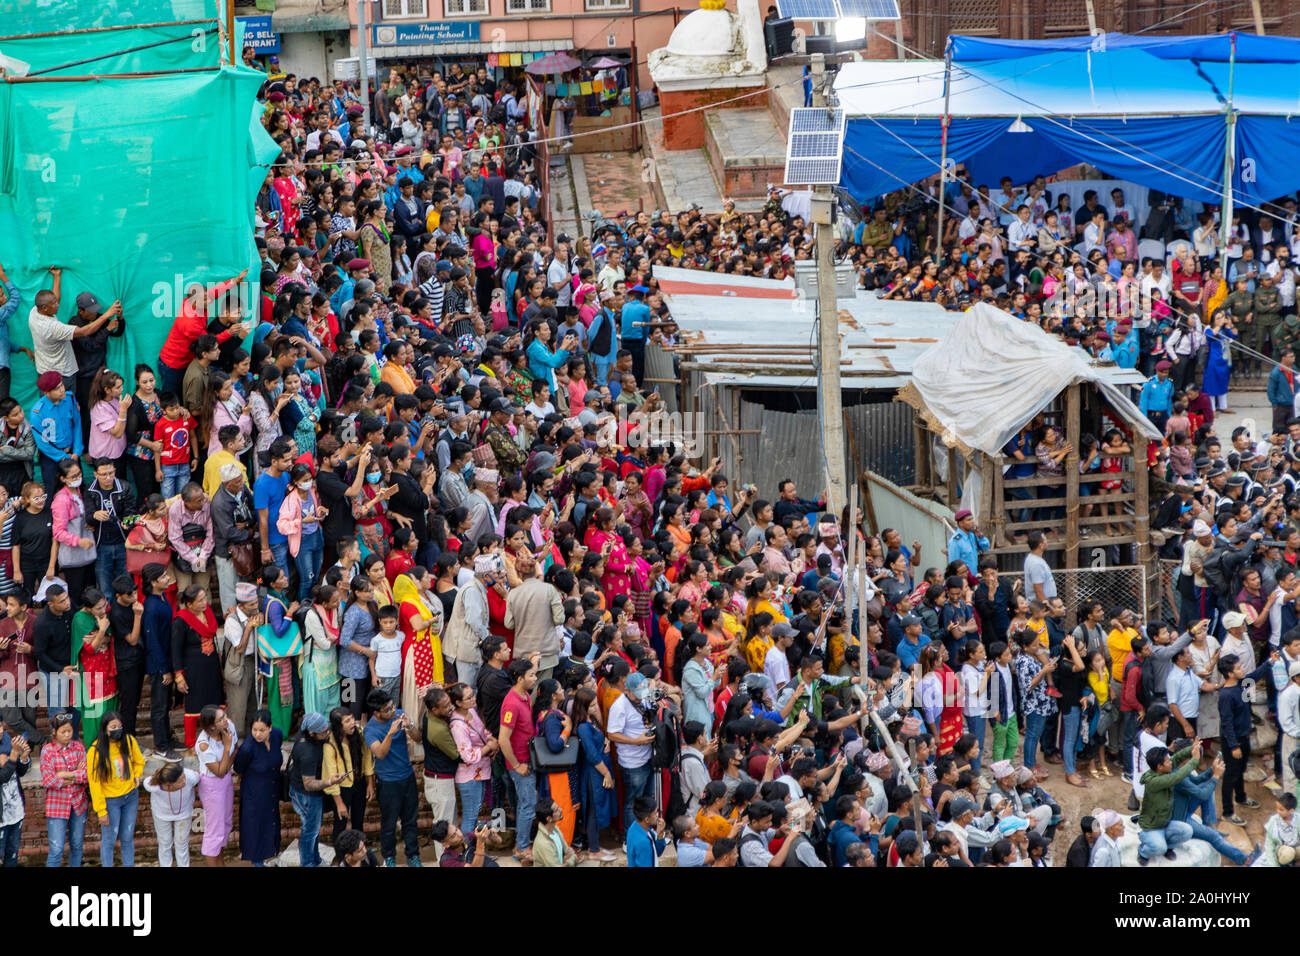 Crowd of people gathers to watch and celebrate Indra Jatra Festival Stock Photo